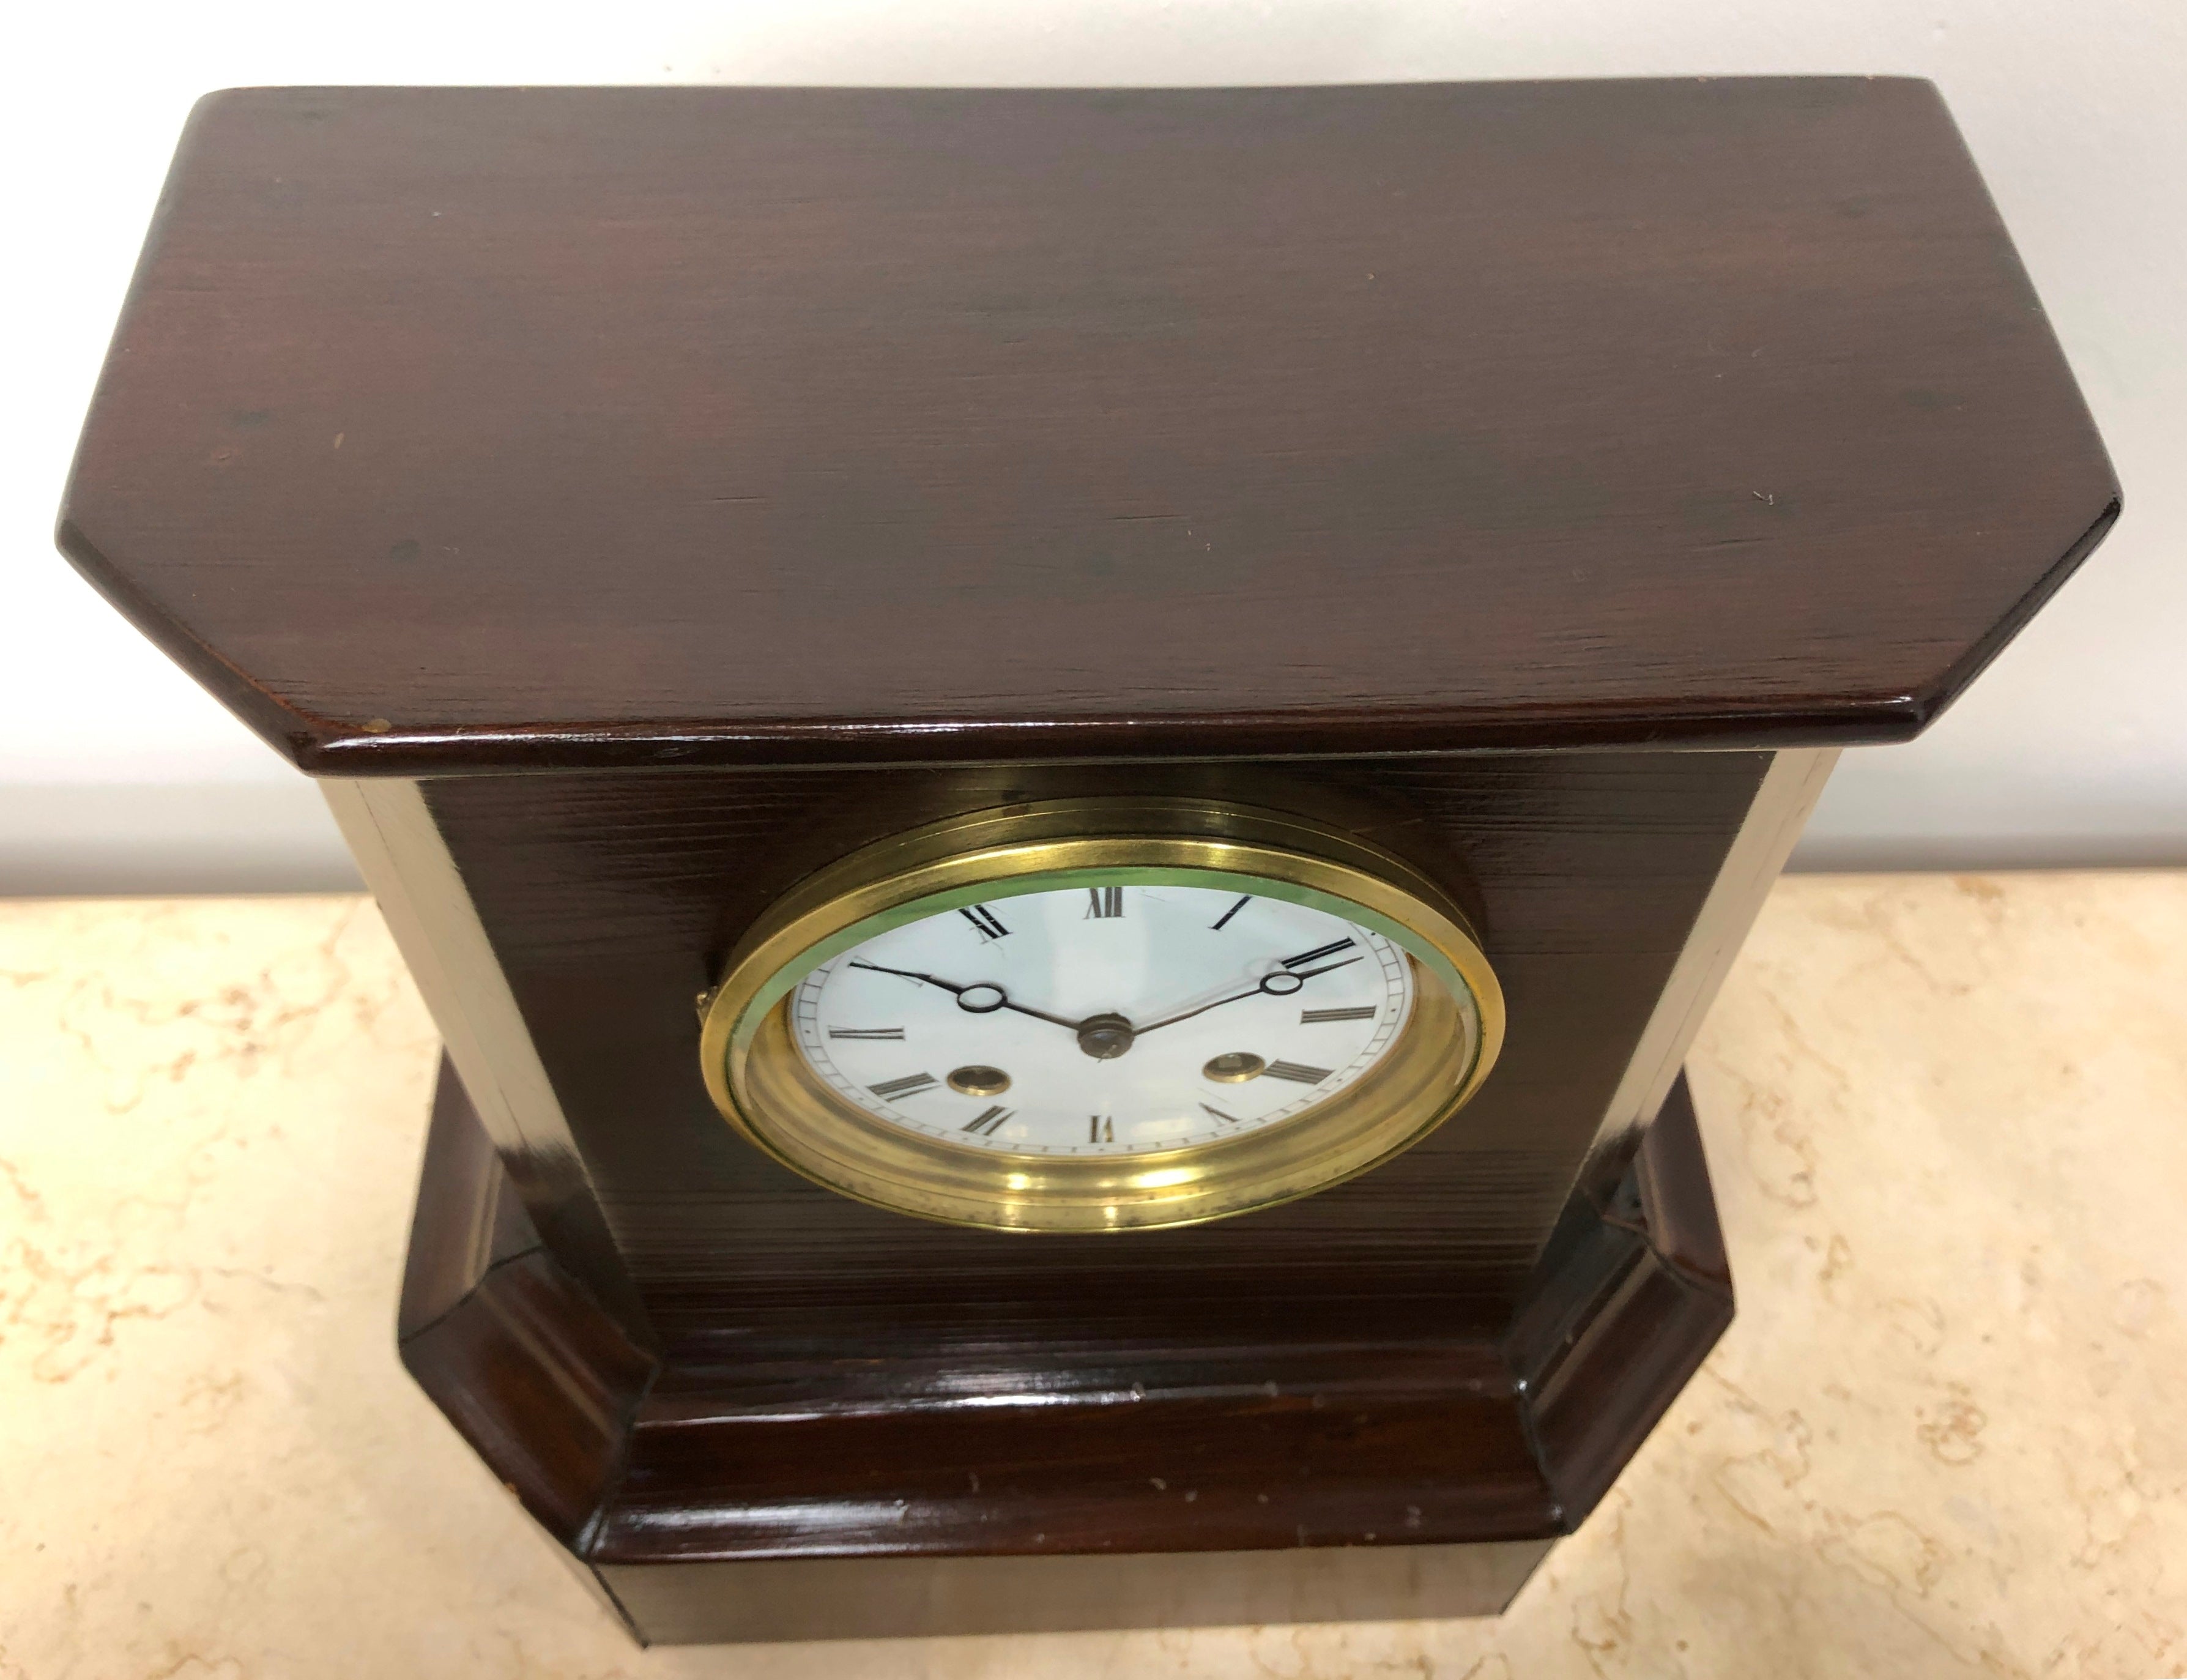 Antique Japy Freres Eils 1855 Bell Chime Mantel Clock | eXibit collection